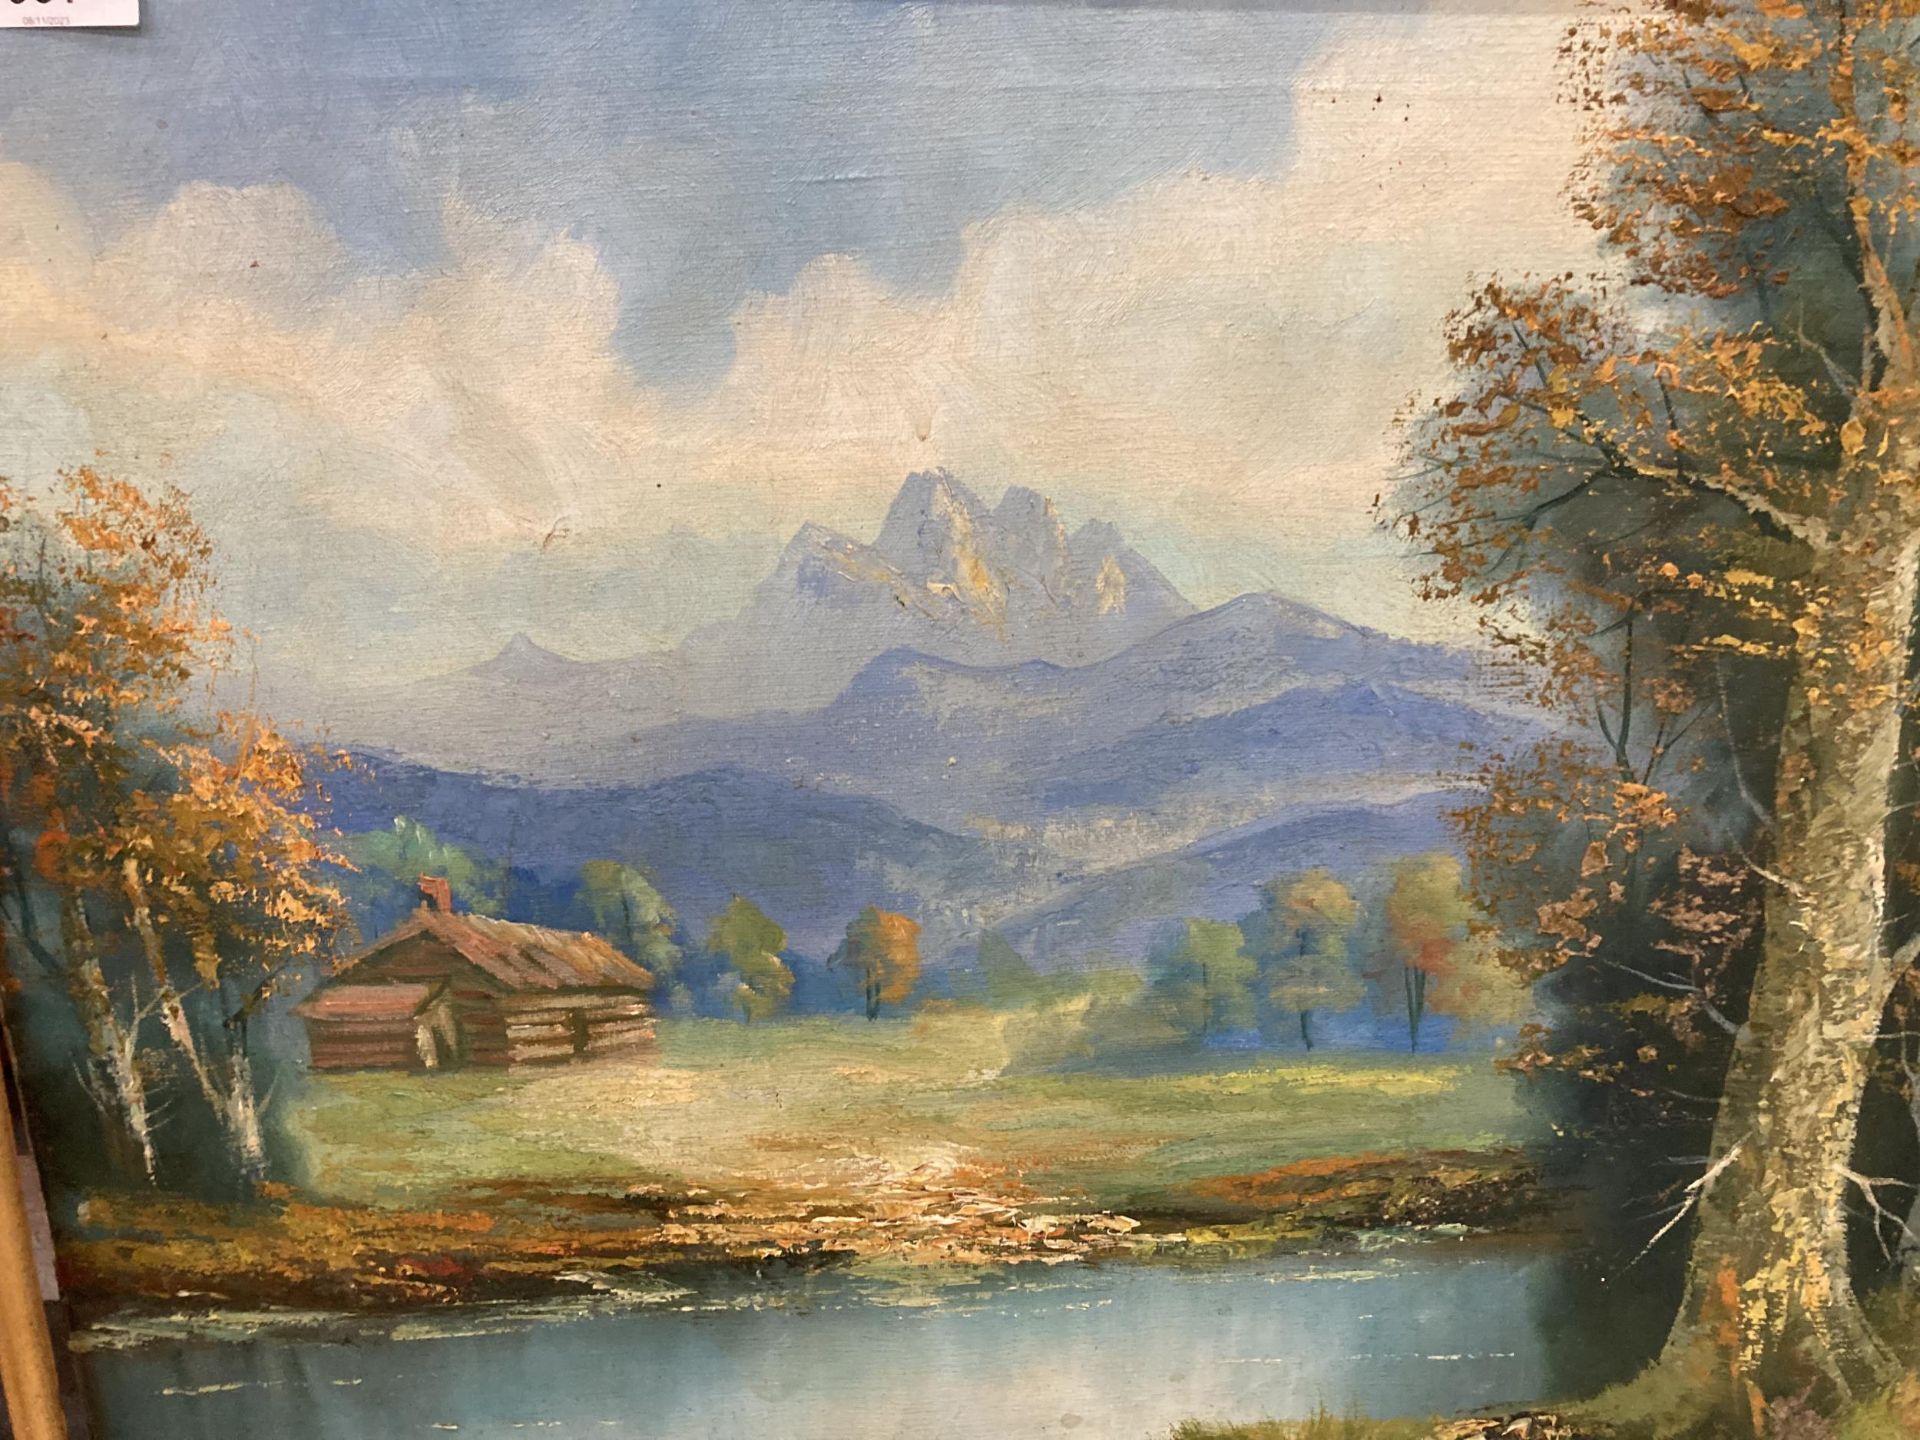 AN OIL ON CANVAS OF A RIVER AND COUNTRY SCENE - Image 2 of 3